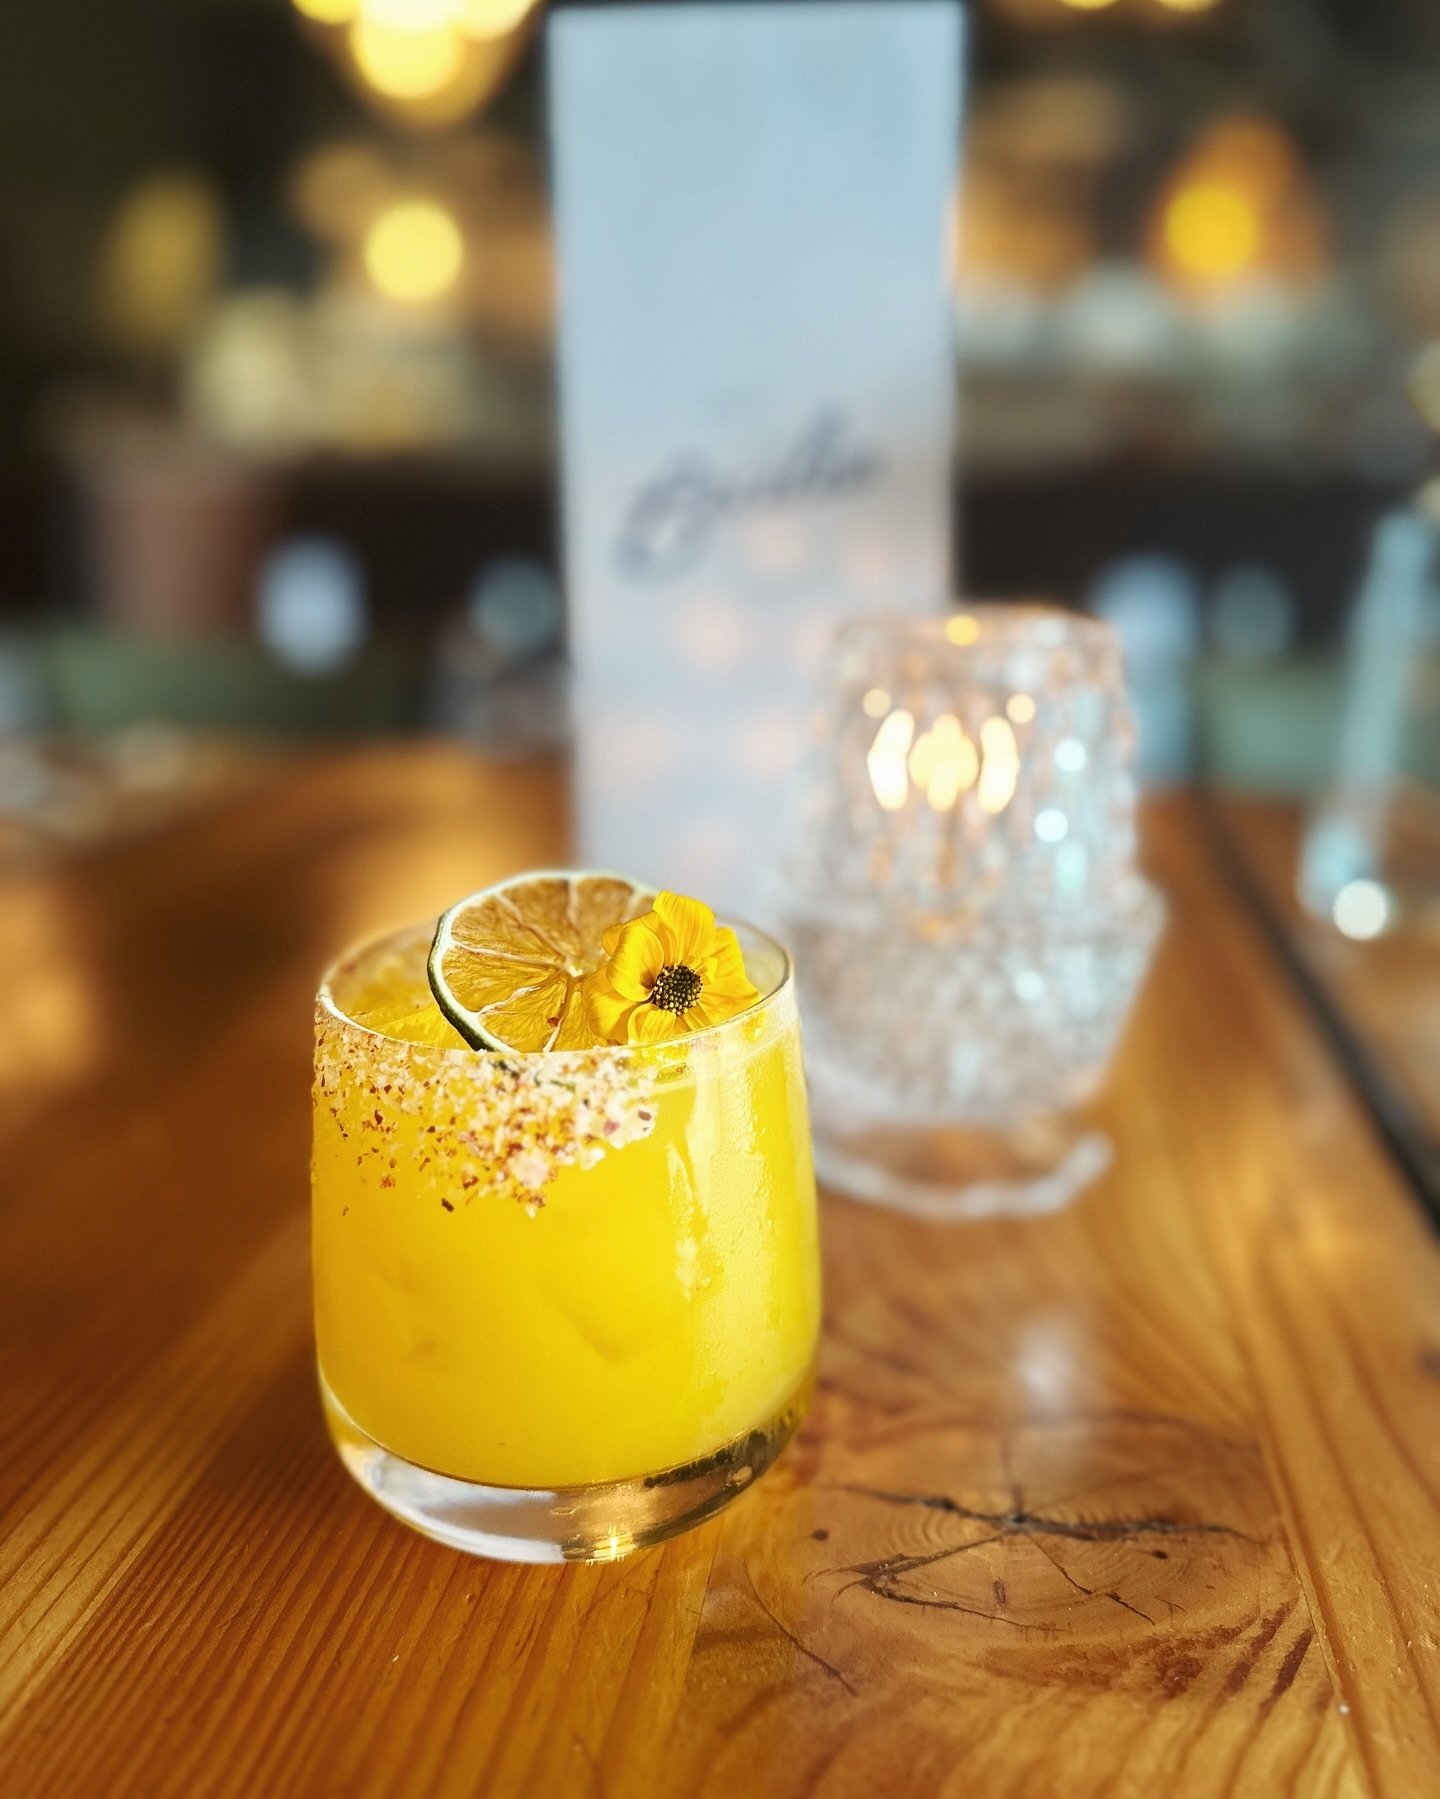 Join us tonight for a mango jalepe&ntilde;o margarita, just the right amount of sassy 😘